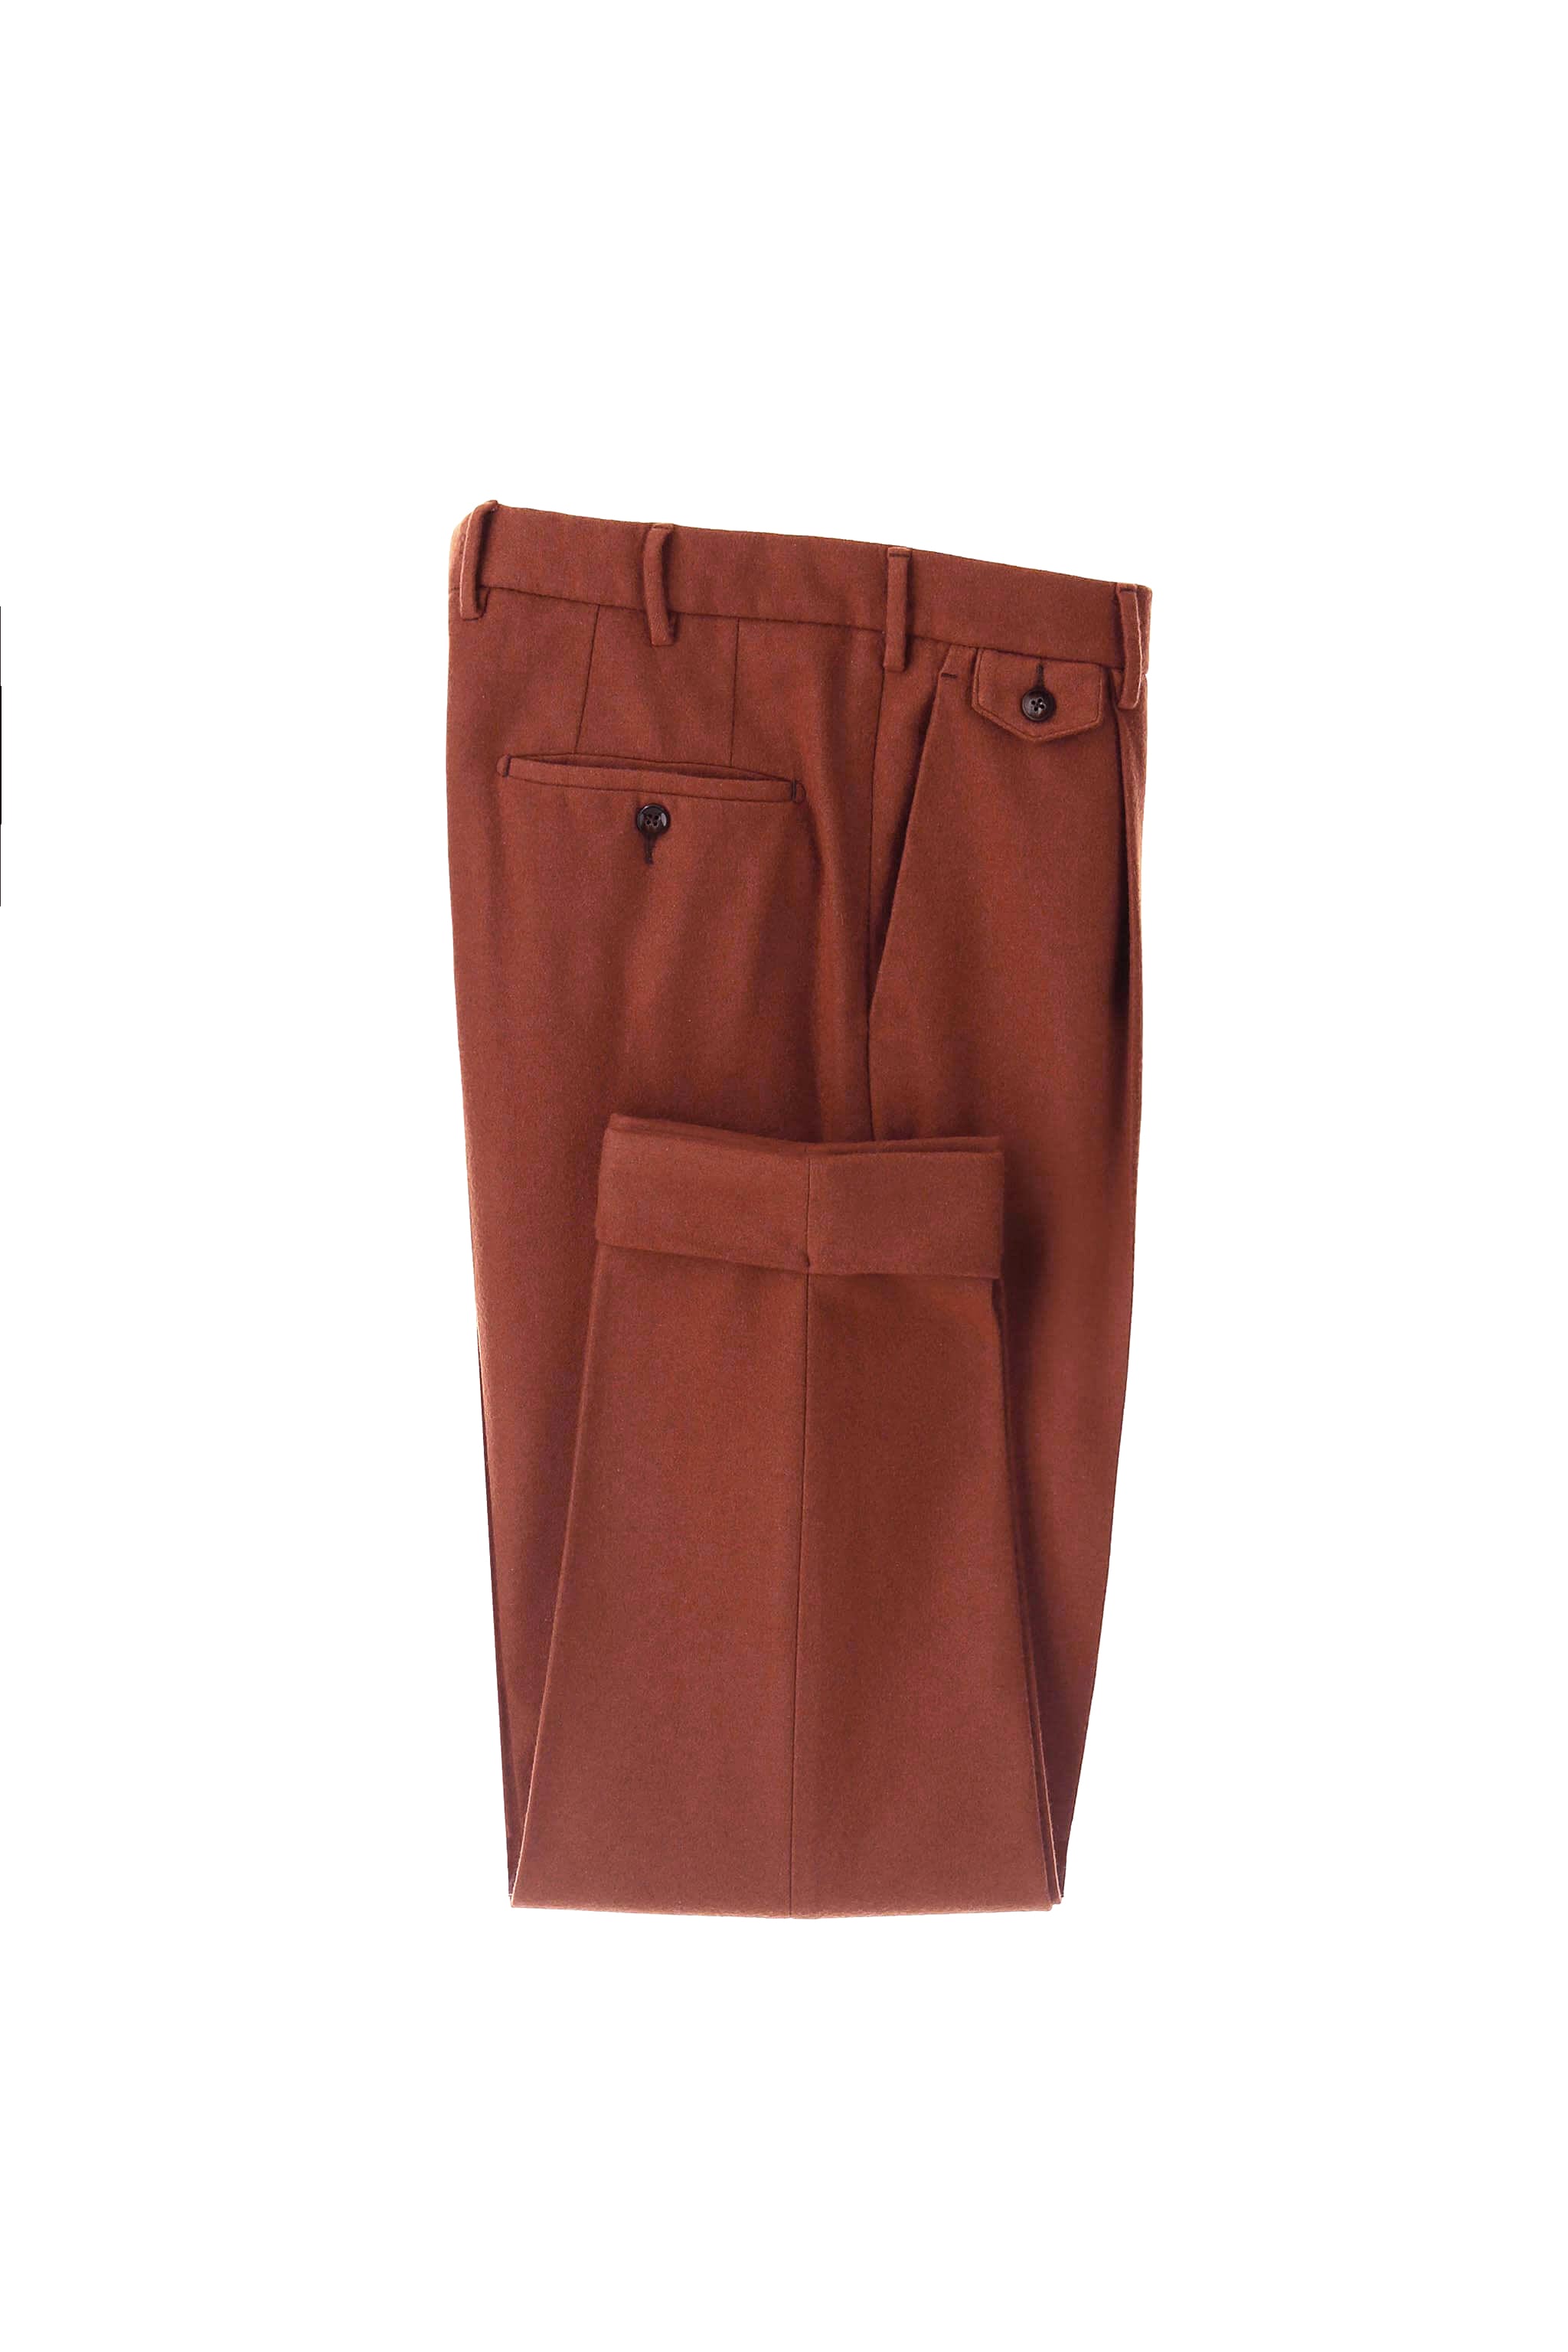 Garment-dyed MILES pants in brown